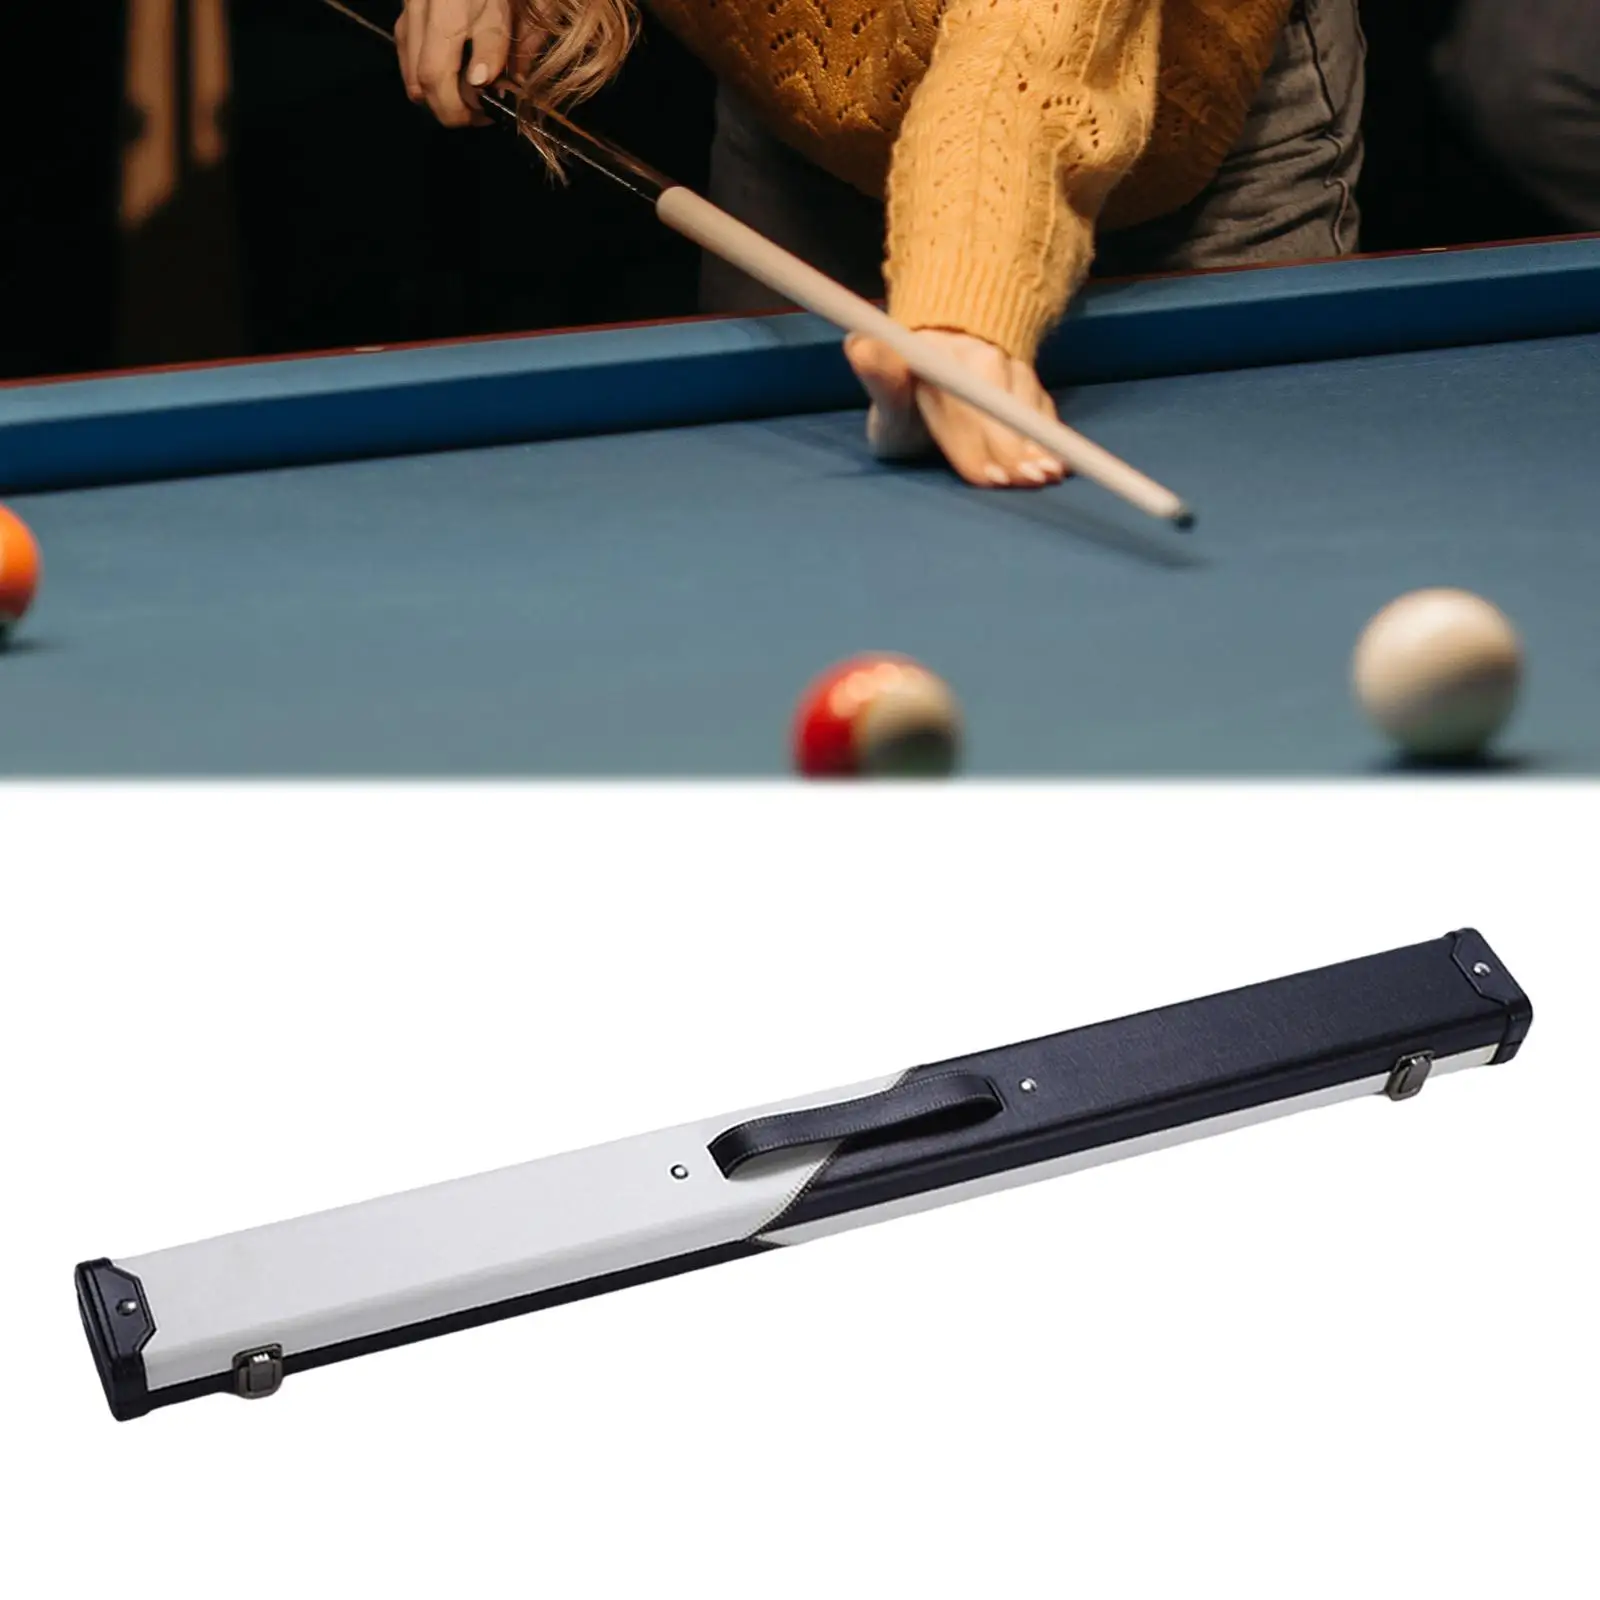 Billiards Pool Hard Case PU Leather Exterior Carrying for 1/2 Snooker